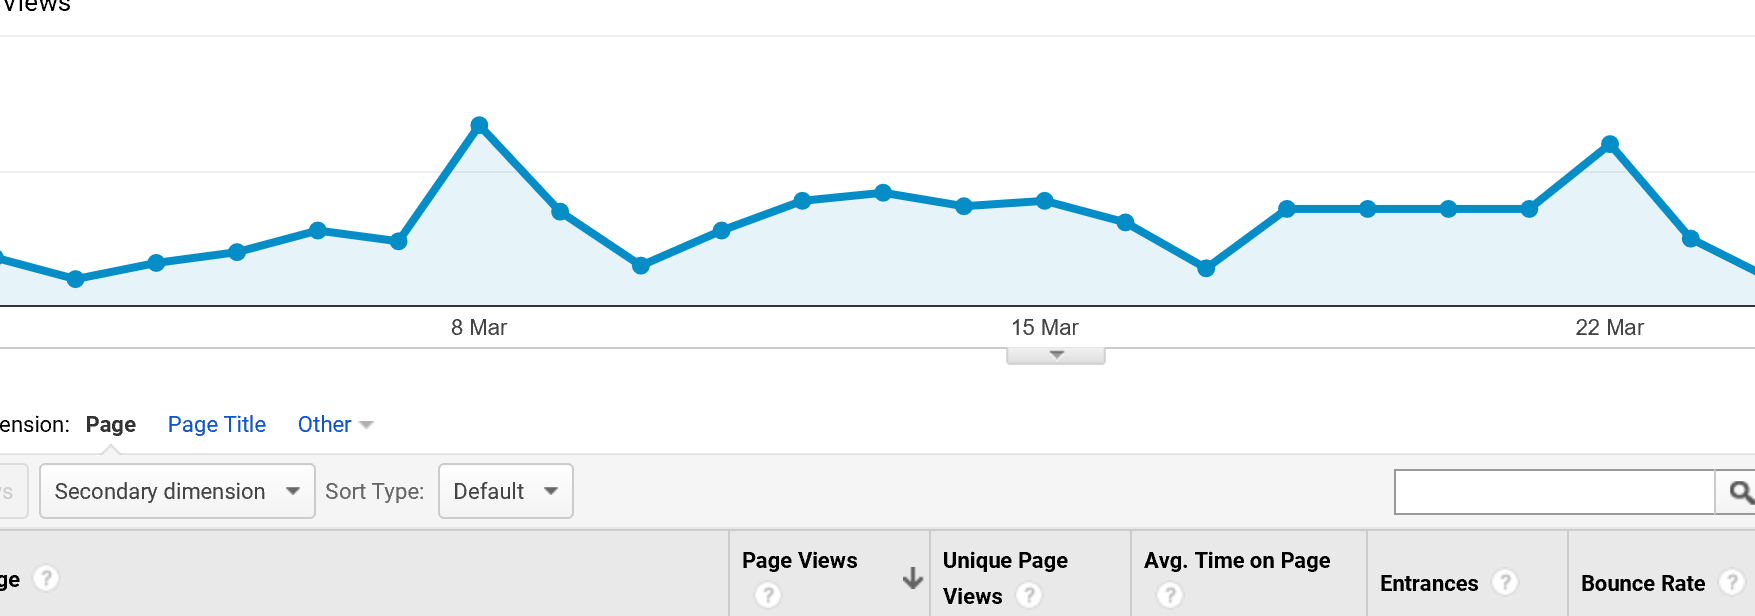 Part of a Google Analytics traffic graph showing page views against time